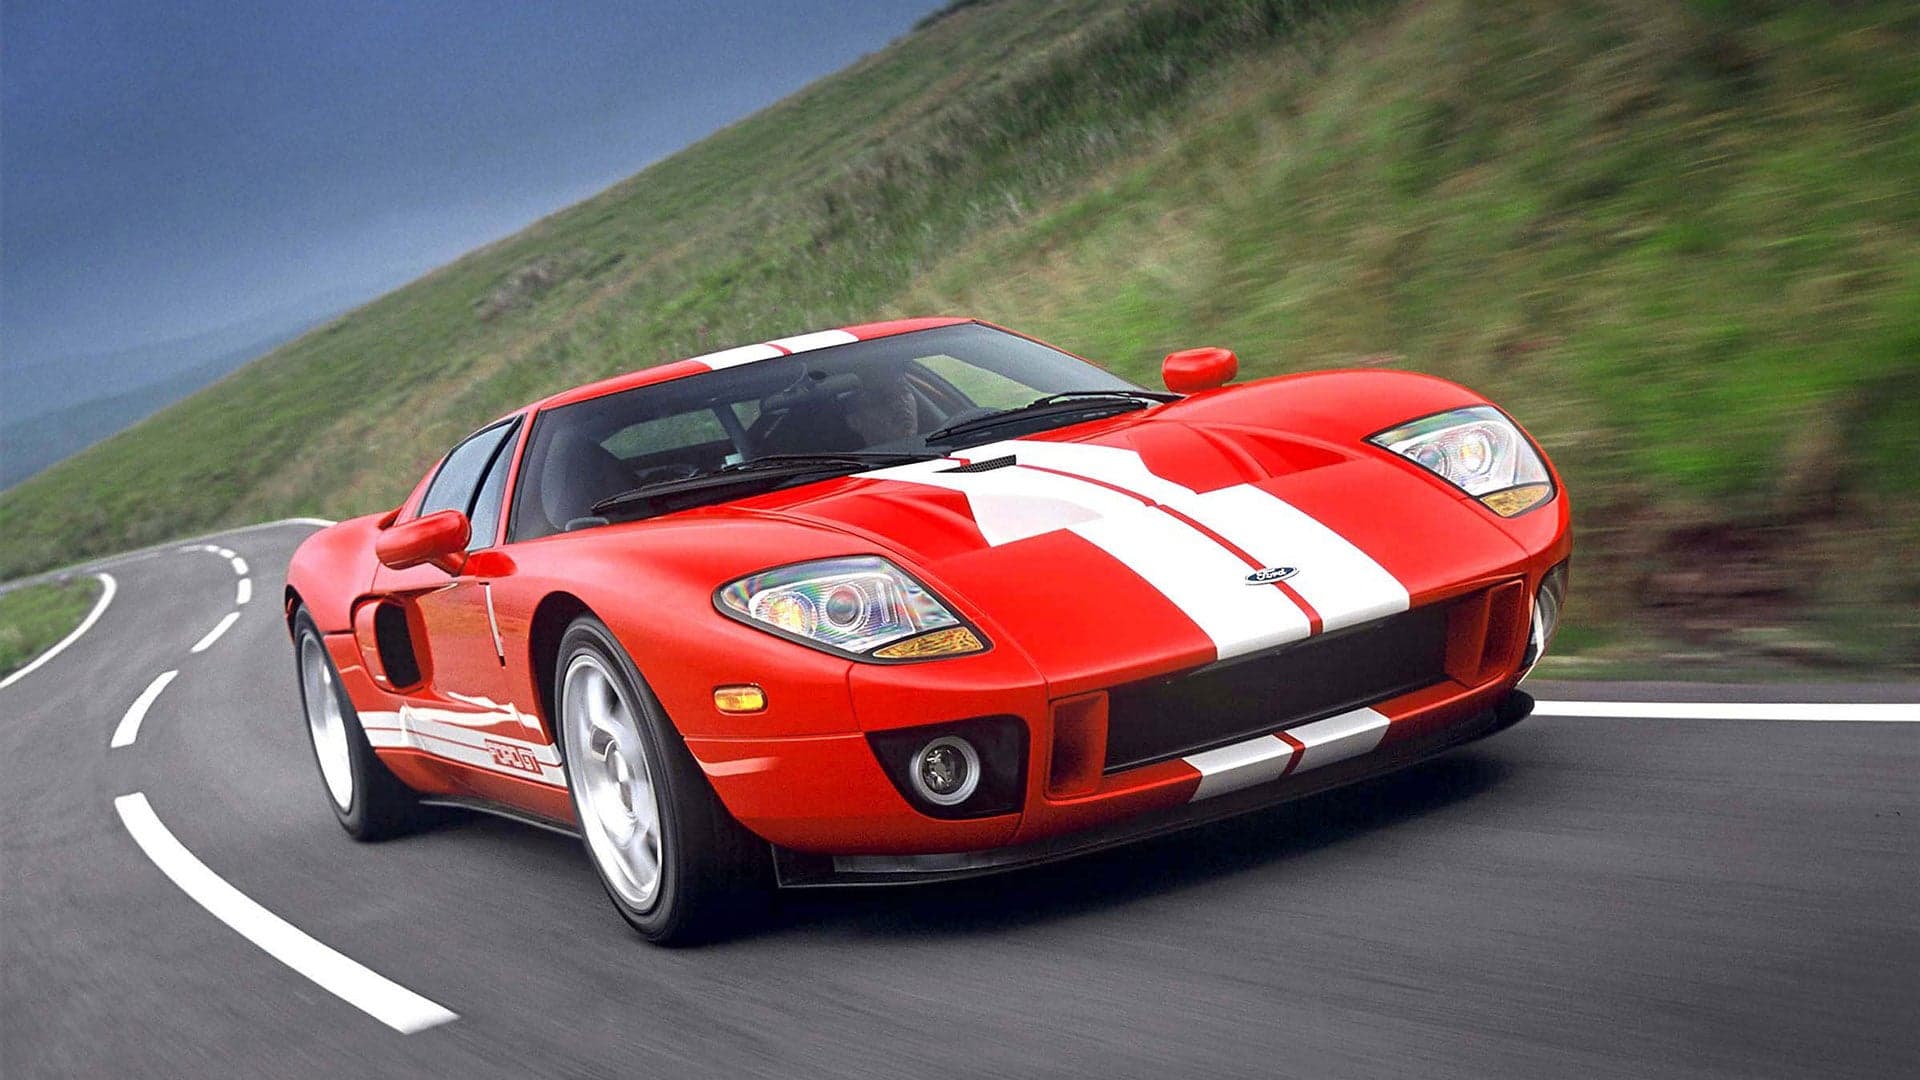 Salma Hayek’s Brother Suing Ford Because the Ford GT Oversteers